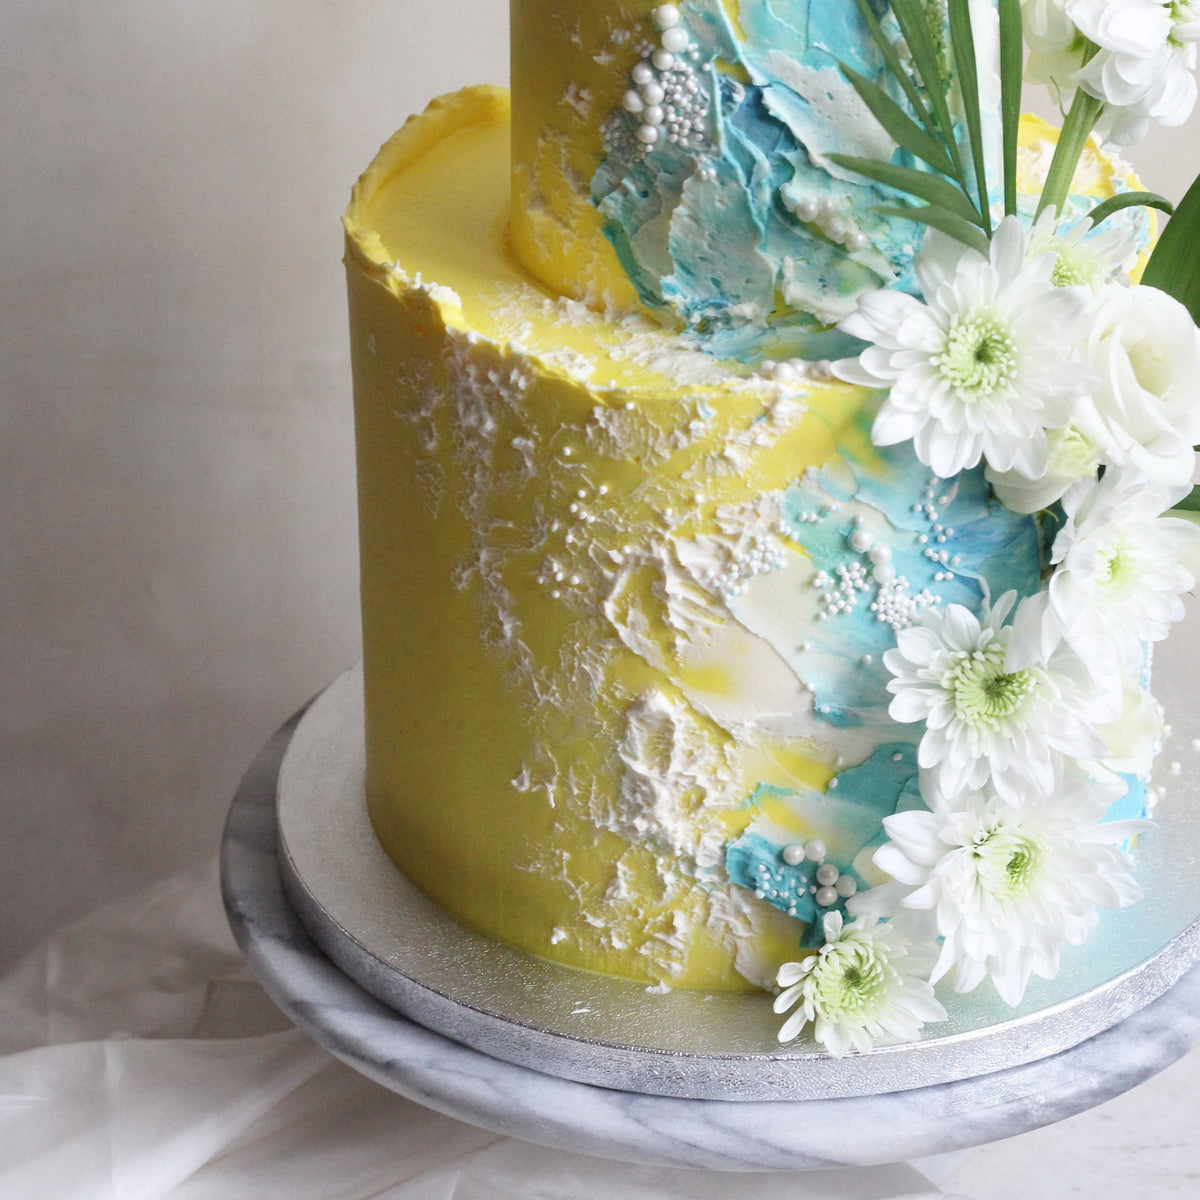 Beach-inspired cake with wavy brushstrokes and a dash of white florals.